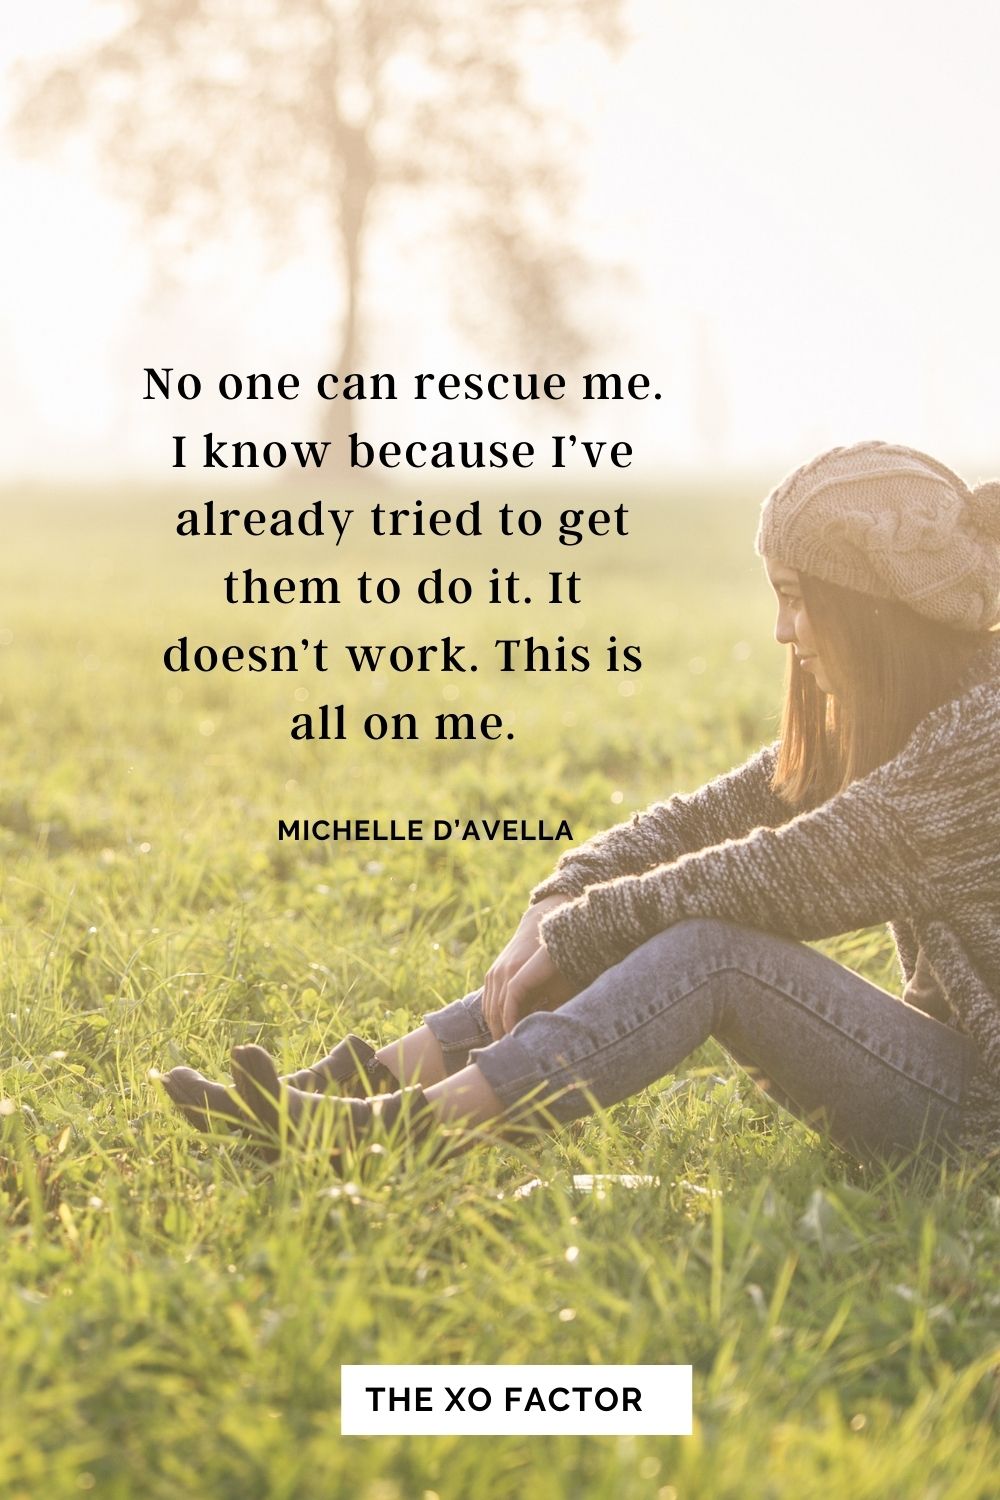 No one can rescue me. I know because I’ve already tried to get them to do it. It doesn’t work. This is all on me. Michelle D’Avella